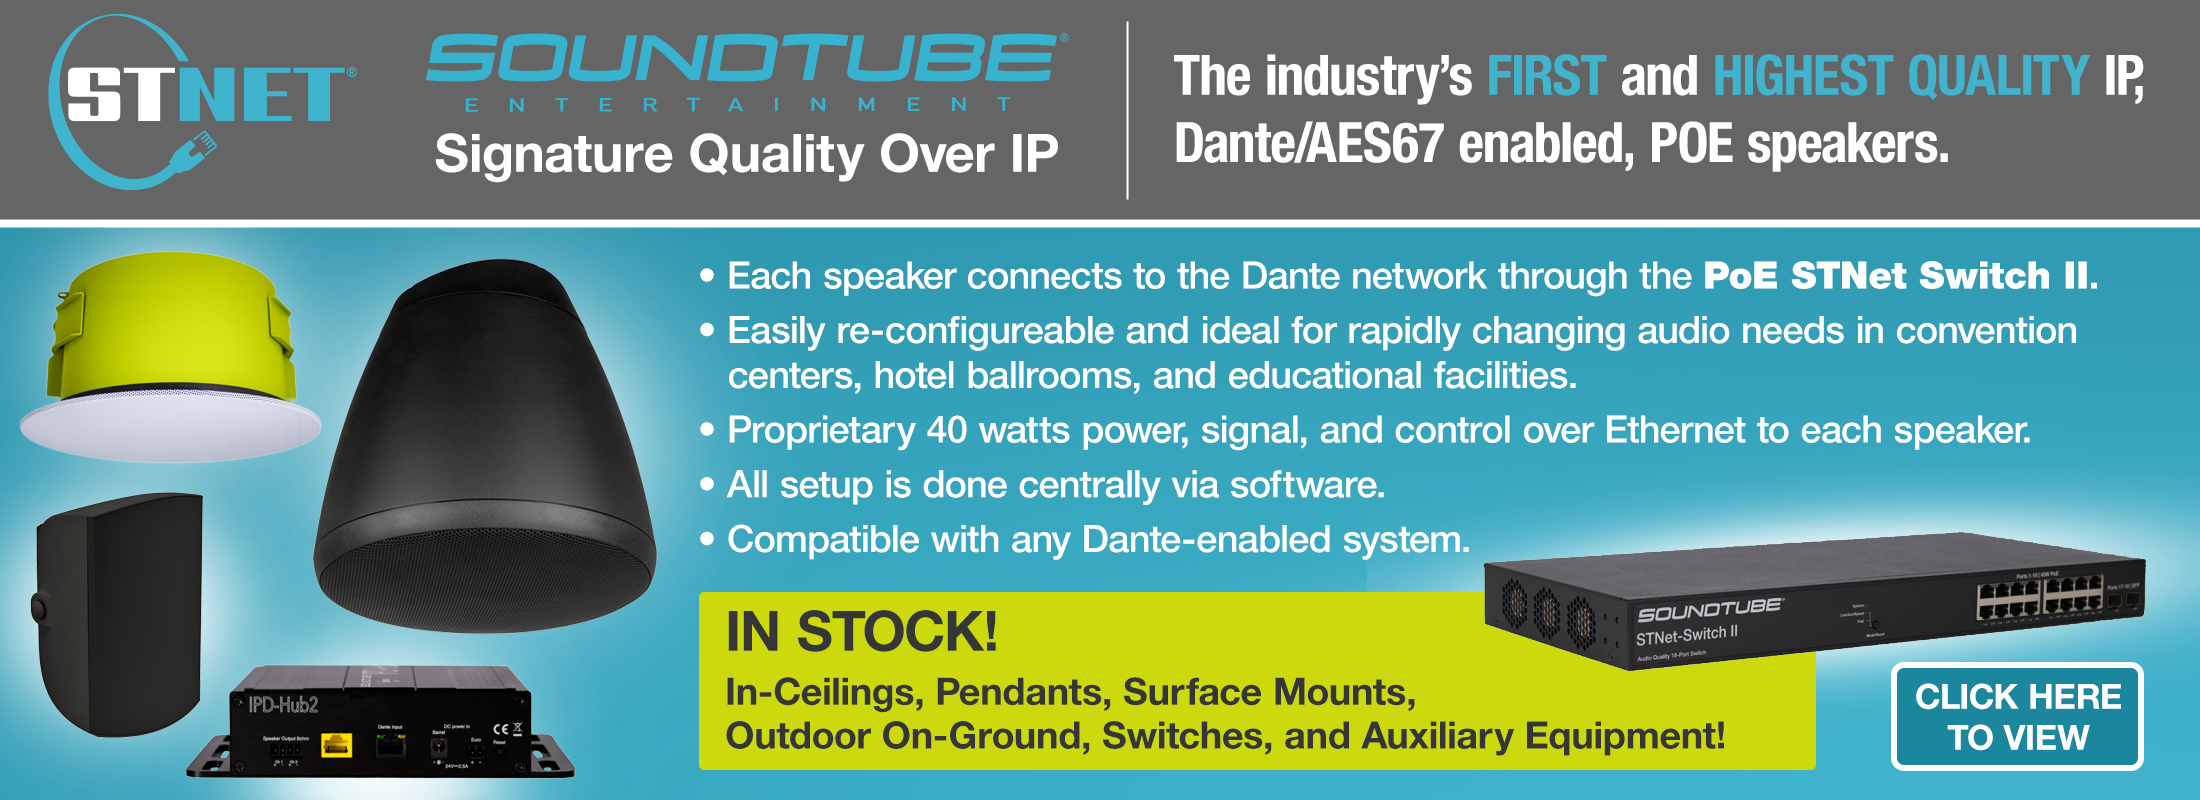 STNet and SoundTube – Signature Quality Over IP.  The industry's FIRST and HIGHEST QUALITY IP, Dante/AES67 enabled, PoE speakers.  Each speaker connects to the Dante Network through the PoE STNet Switch II. 